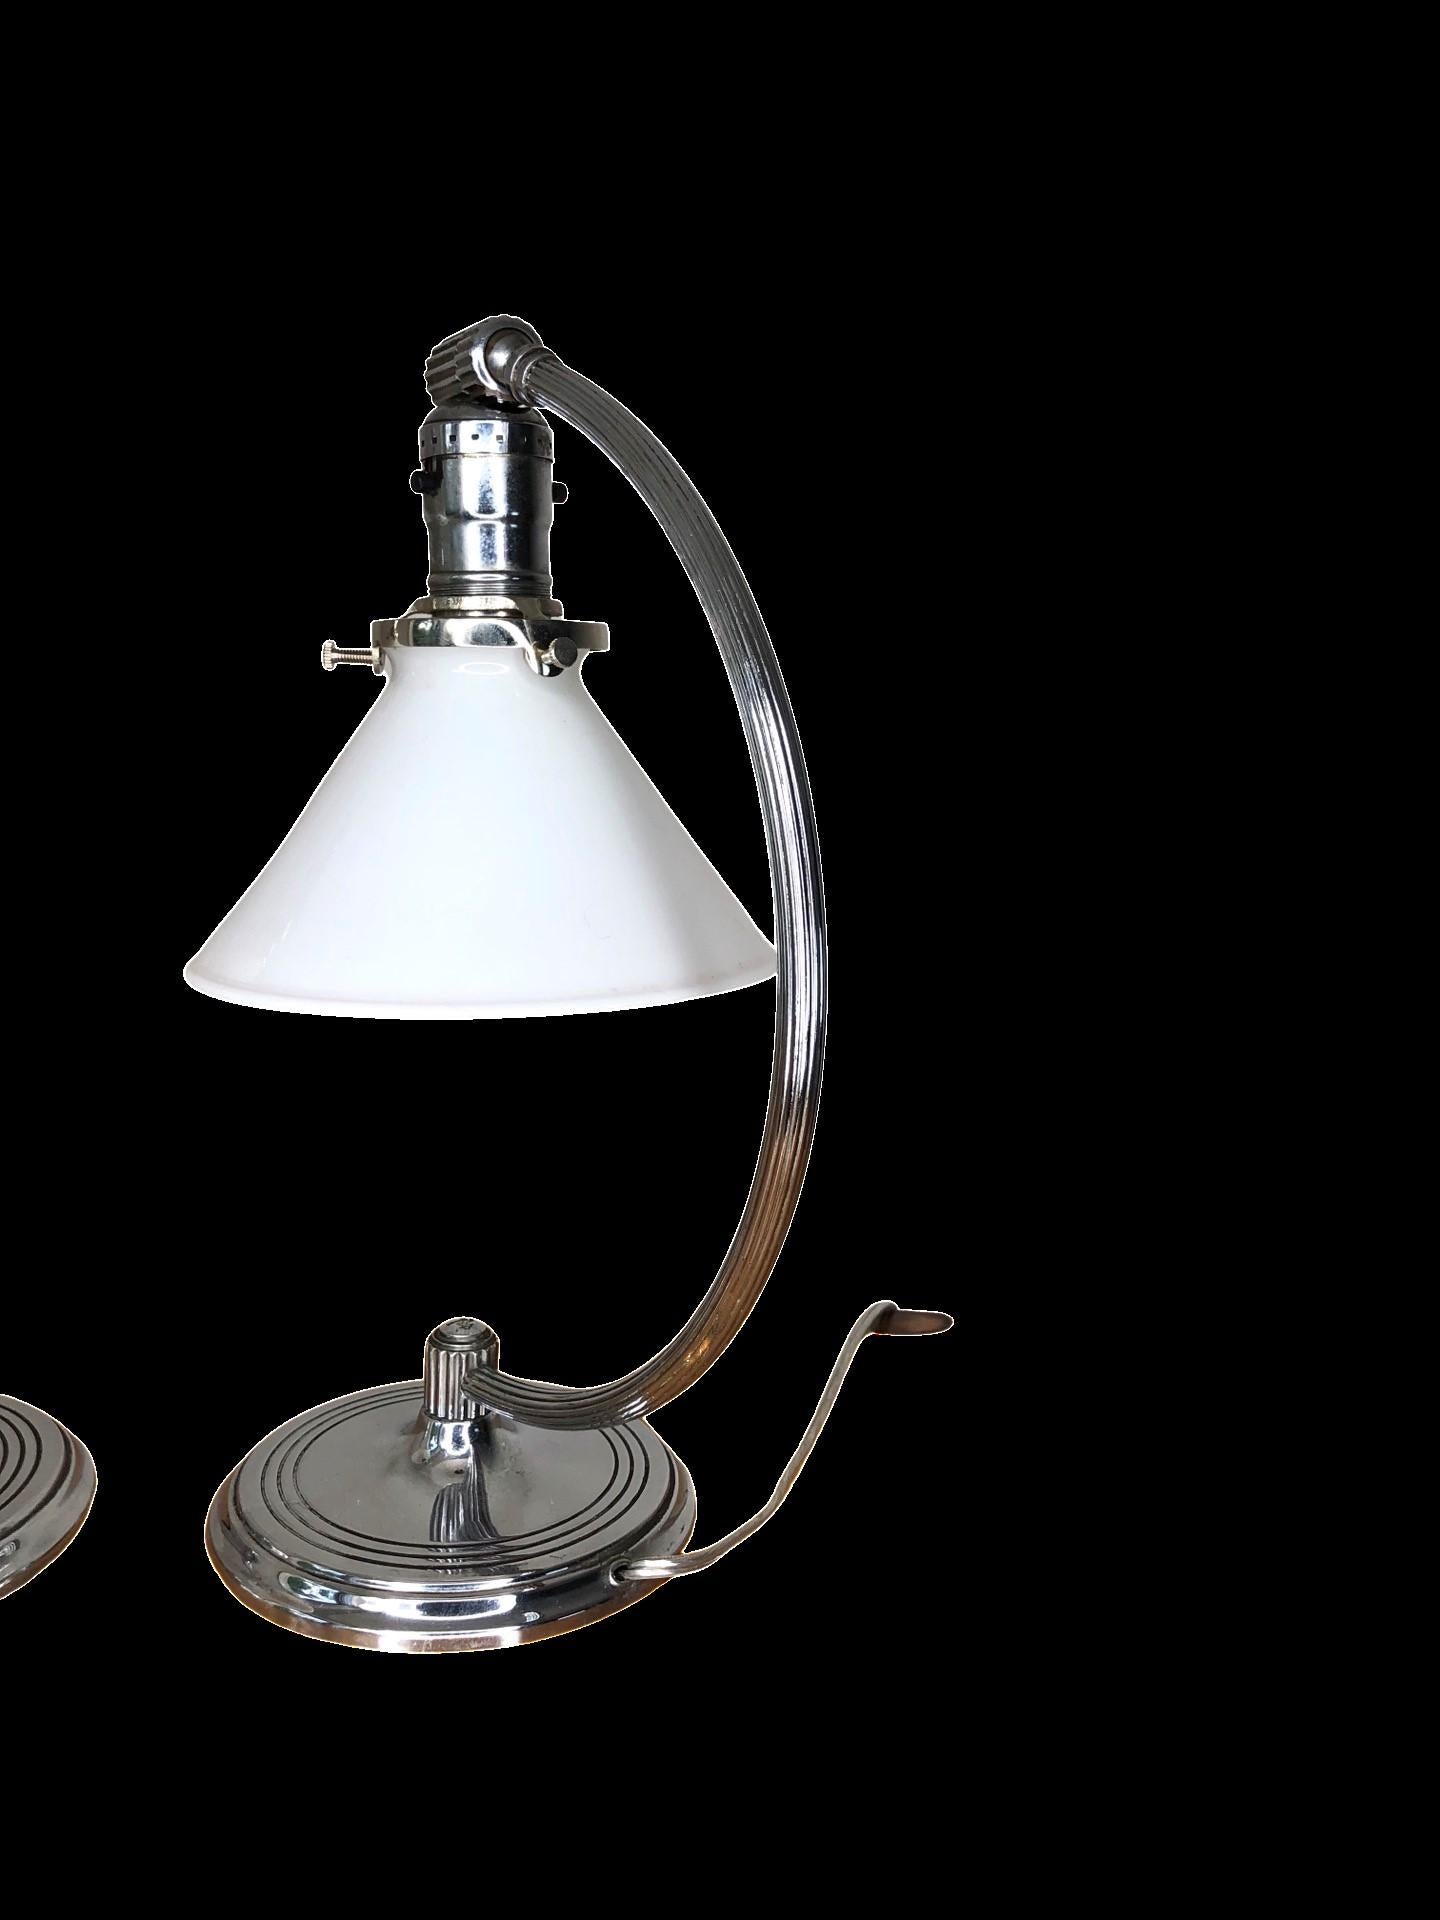 1930’s Chase Lamp Company Chrome Art Deco Desk Lamps, featuring a pivoting head and milk glass lampshades. Stamped on the base with Chase archer mark. Wired and in good working condition
